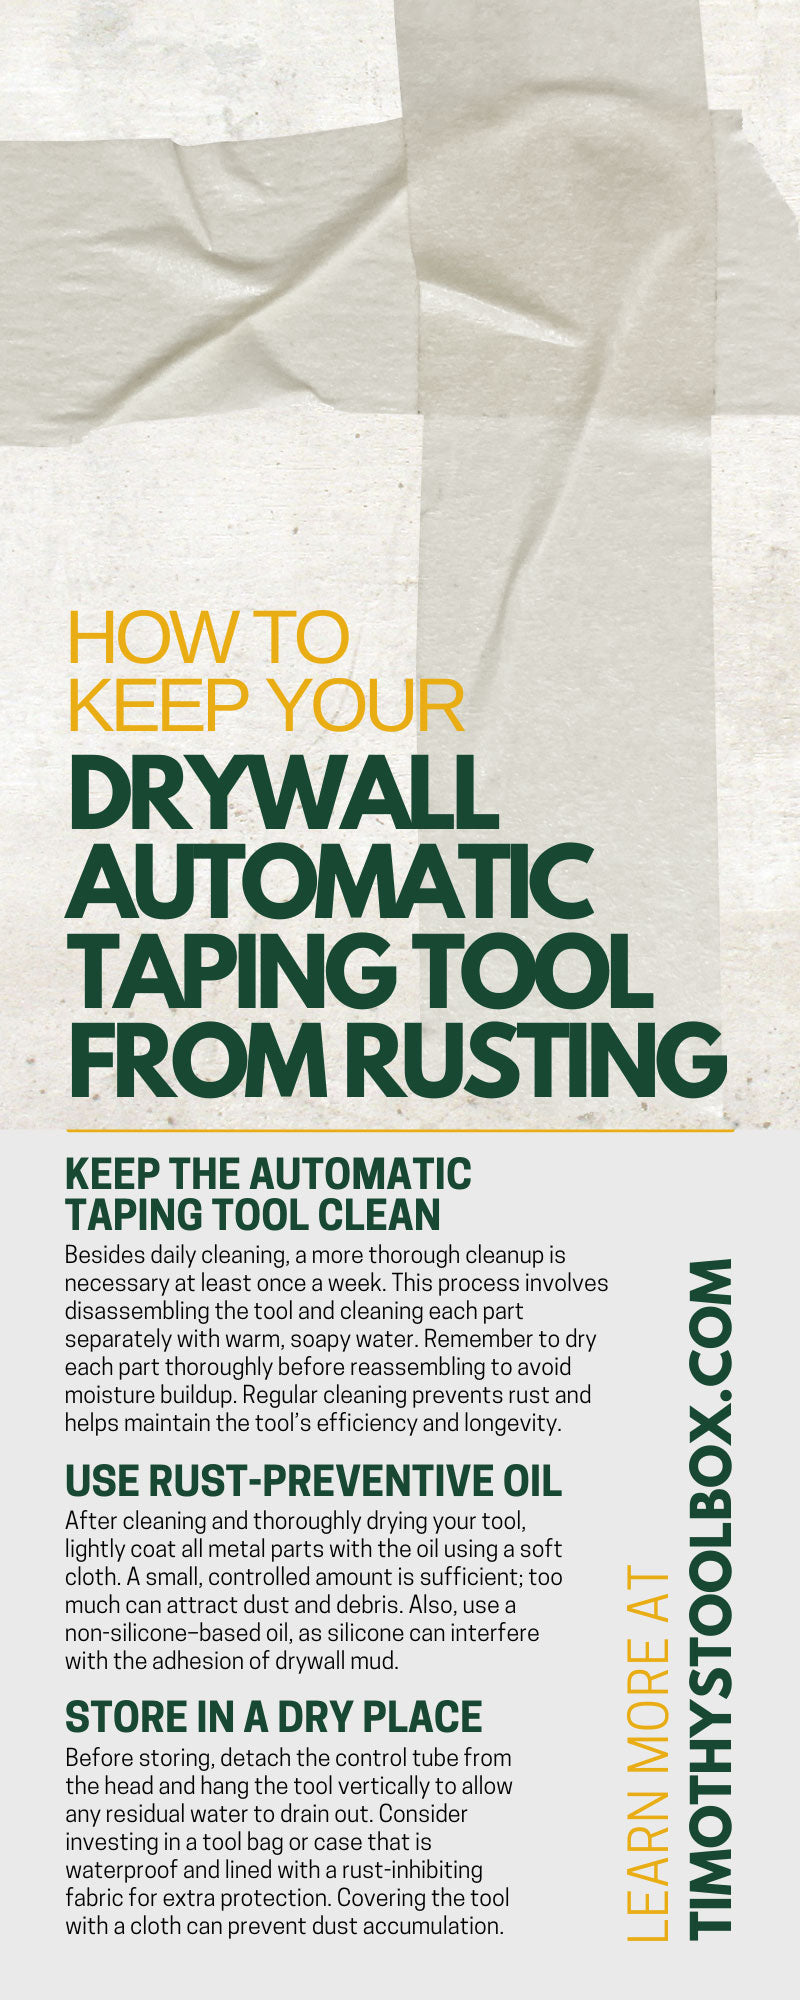 How To Keep Your Drywall Automatic Taping Tool From Rusting